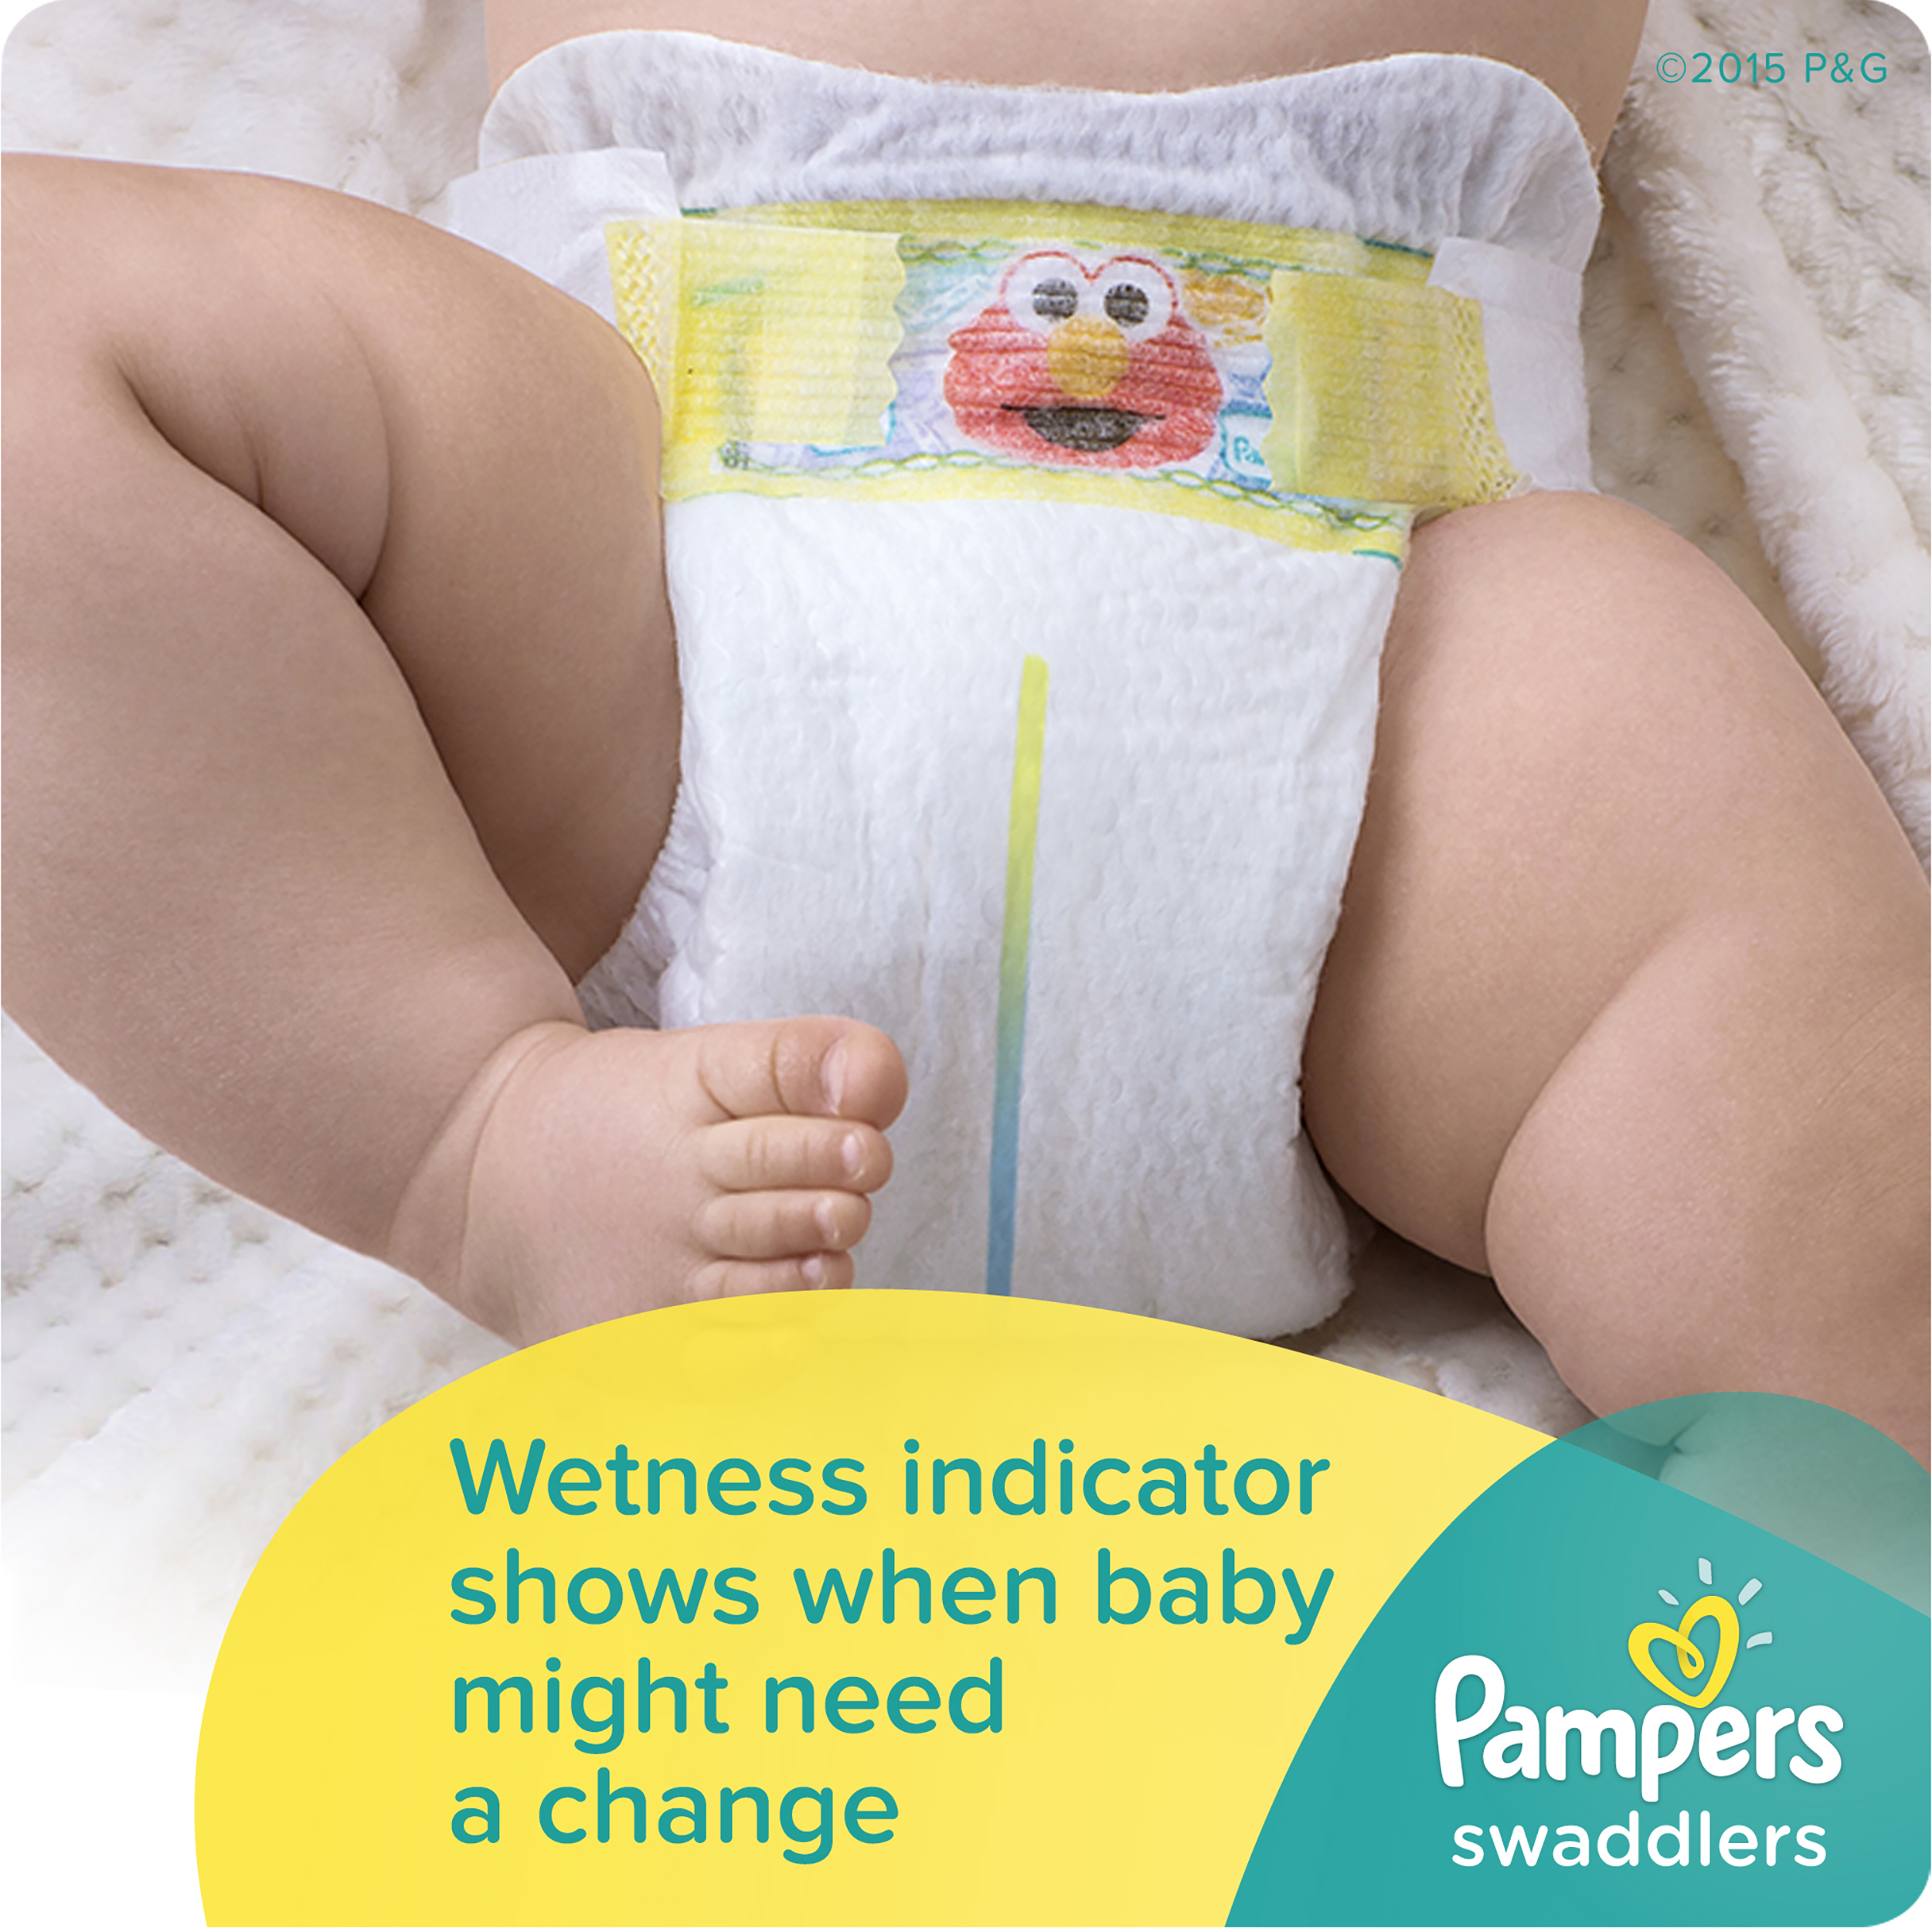 Pampers Swaddlers Diapers Size 5 104 count - image 5 of 10